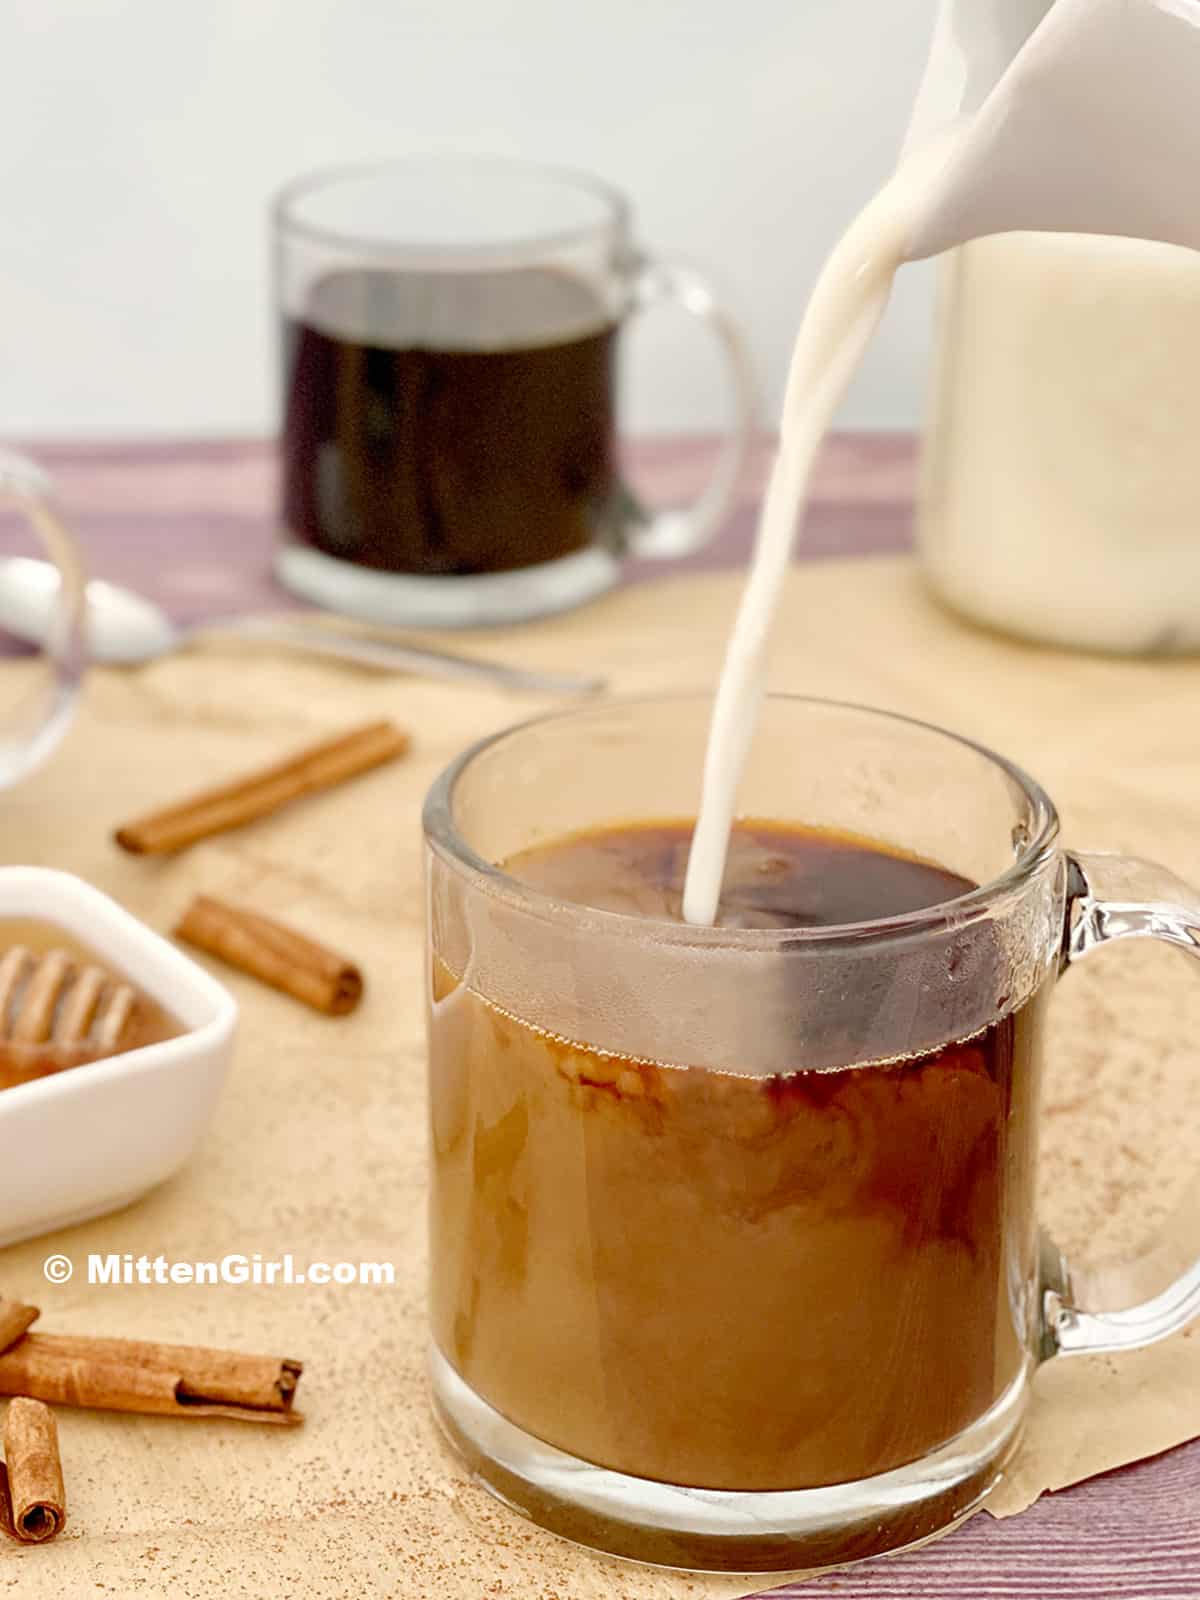 Miel milk being poured into a cup of coffee.